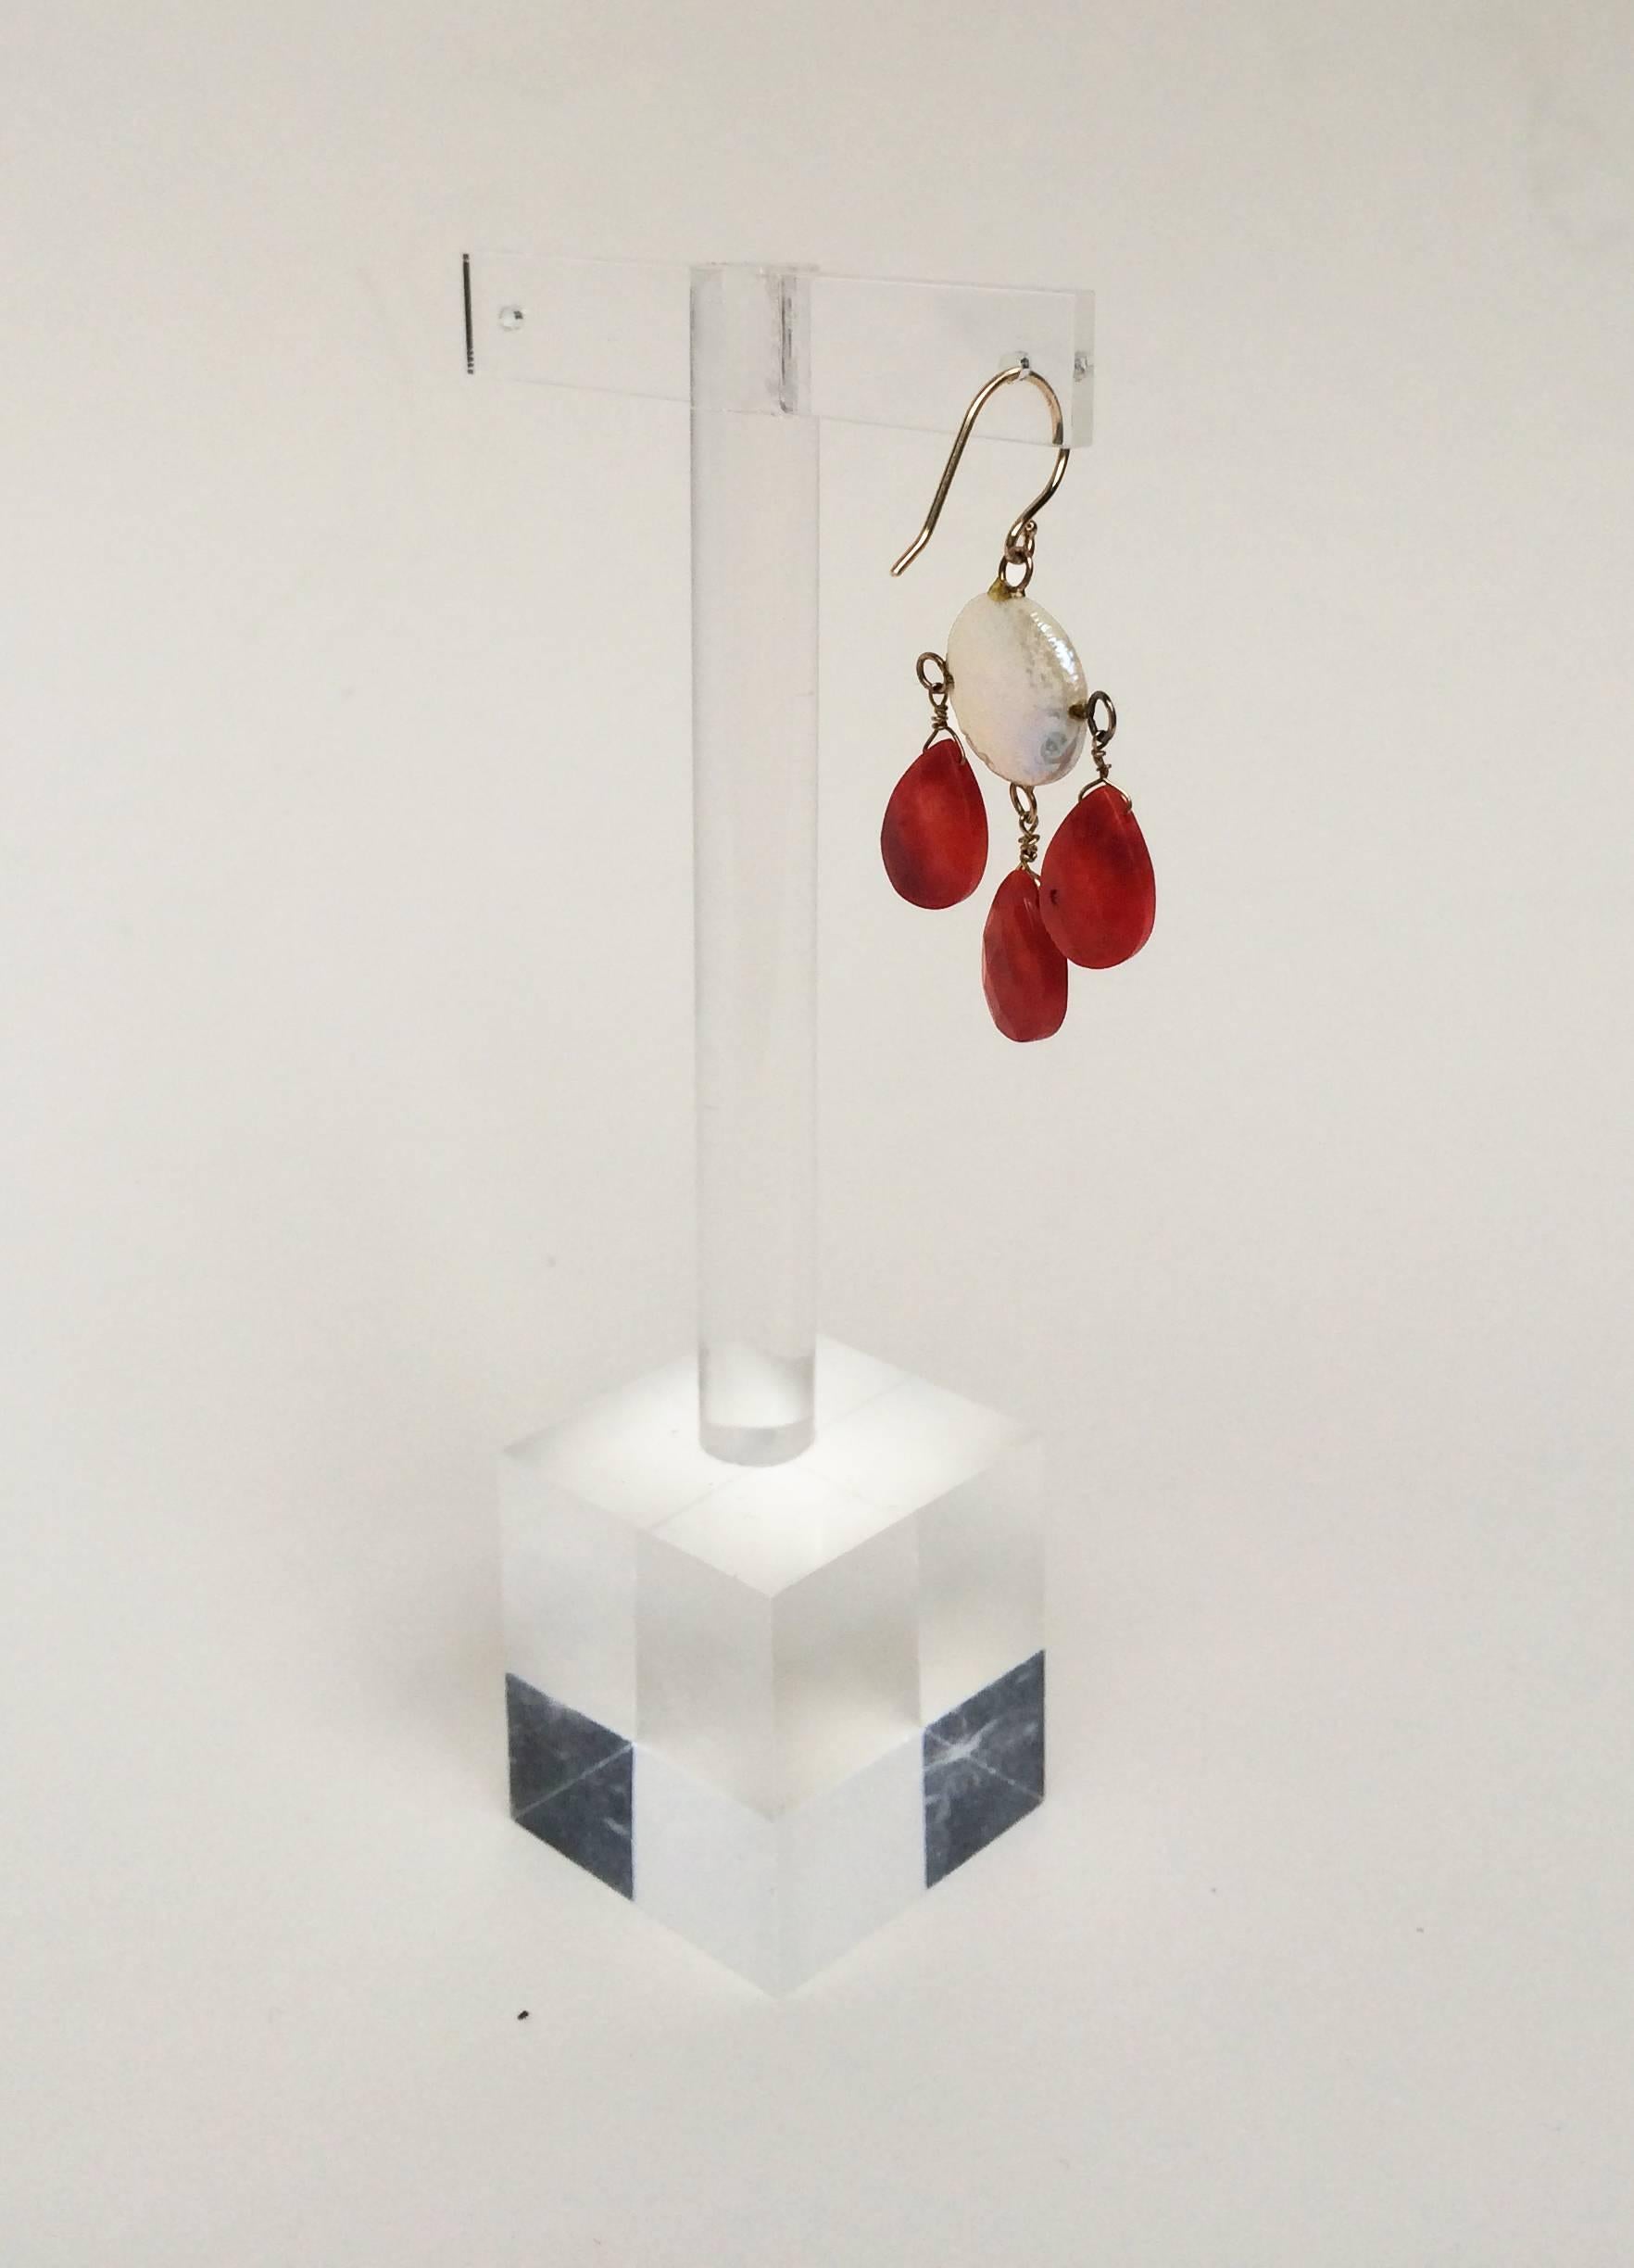 These minimalist earrings are simple in design, but elegant and striking with the rich red coral drop beads and glistening coin pearls. Highlighting the stones are 14k yellow gold wiring and hook. The earrings hang at 1.5 inches to accentuate the